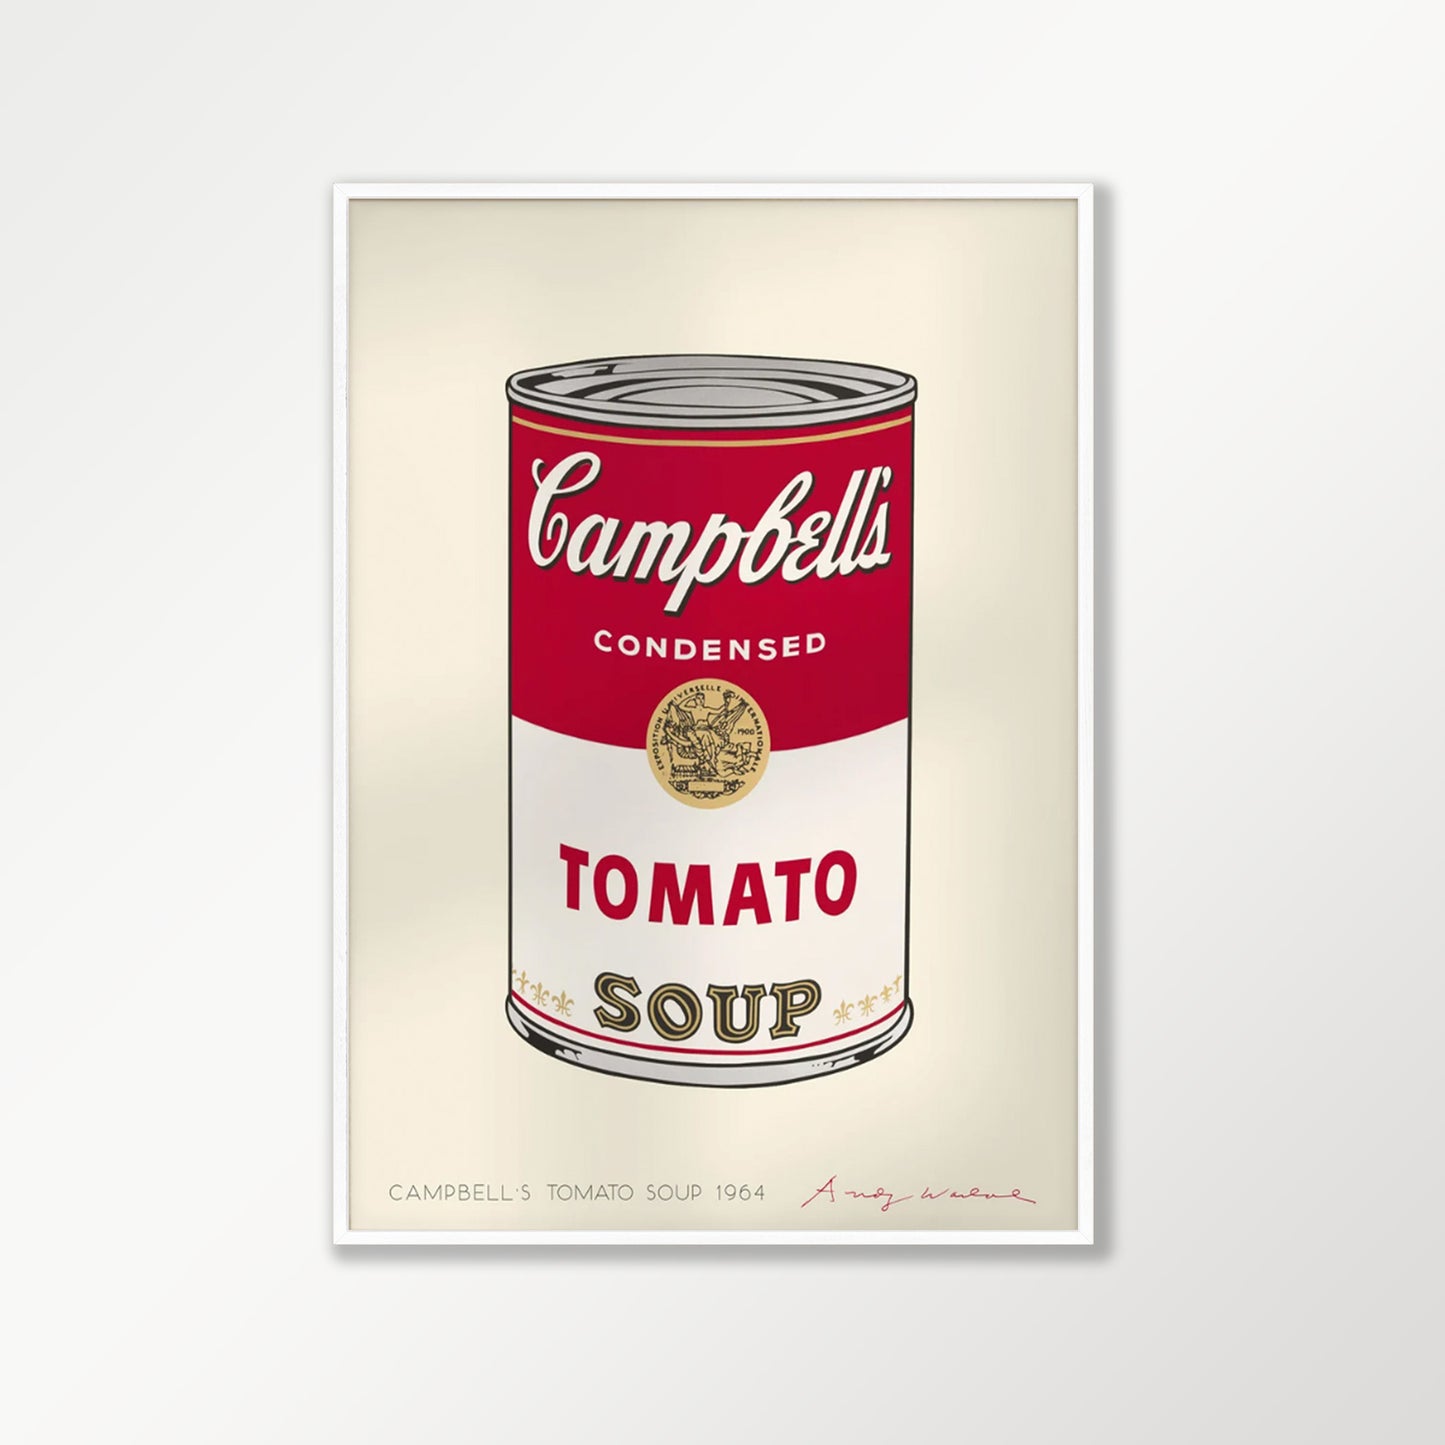 Campbells Soup Exhibition Poster by Andy Warhol